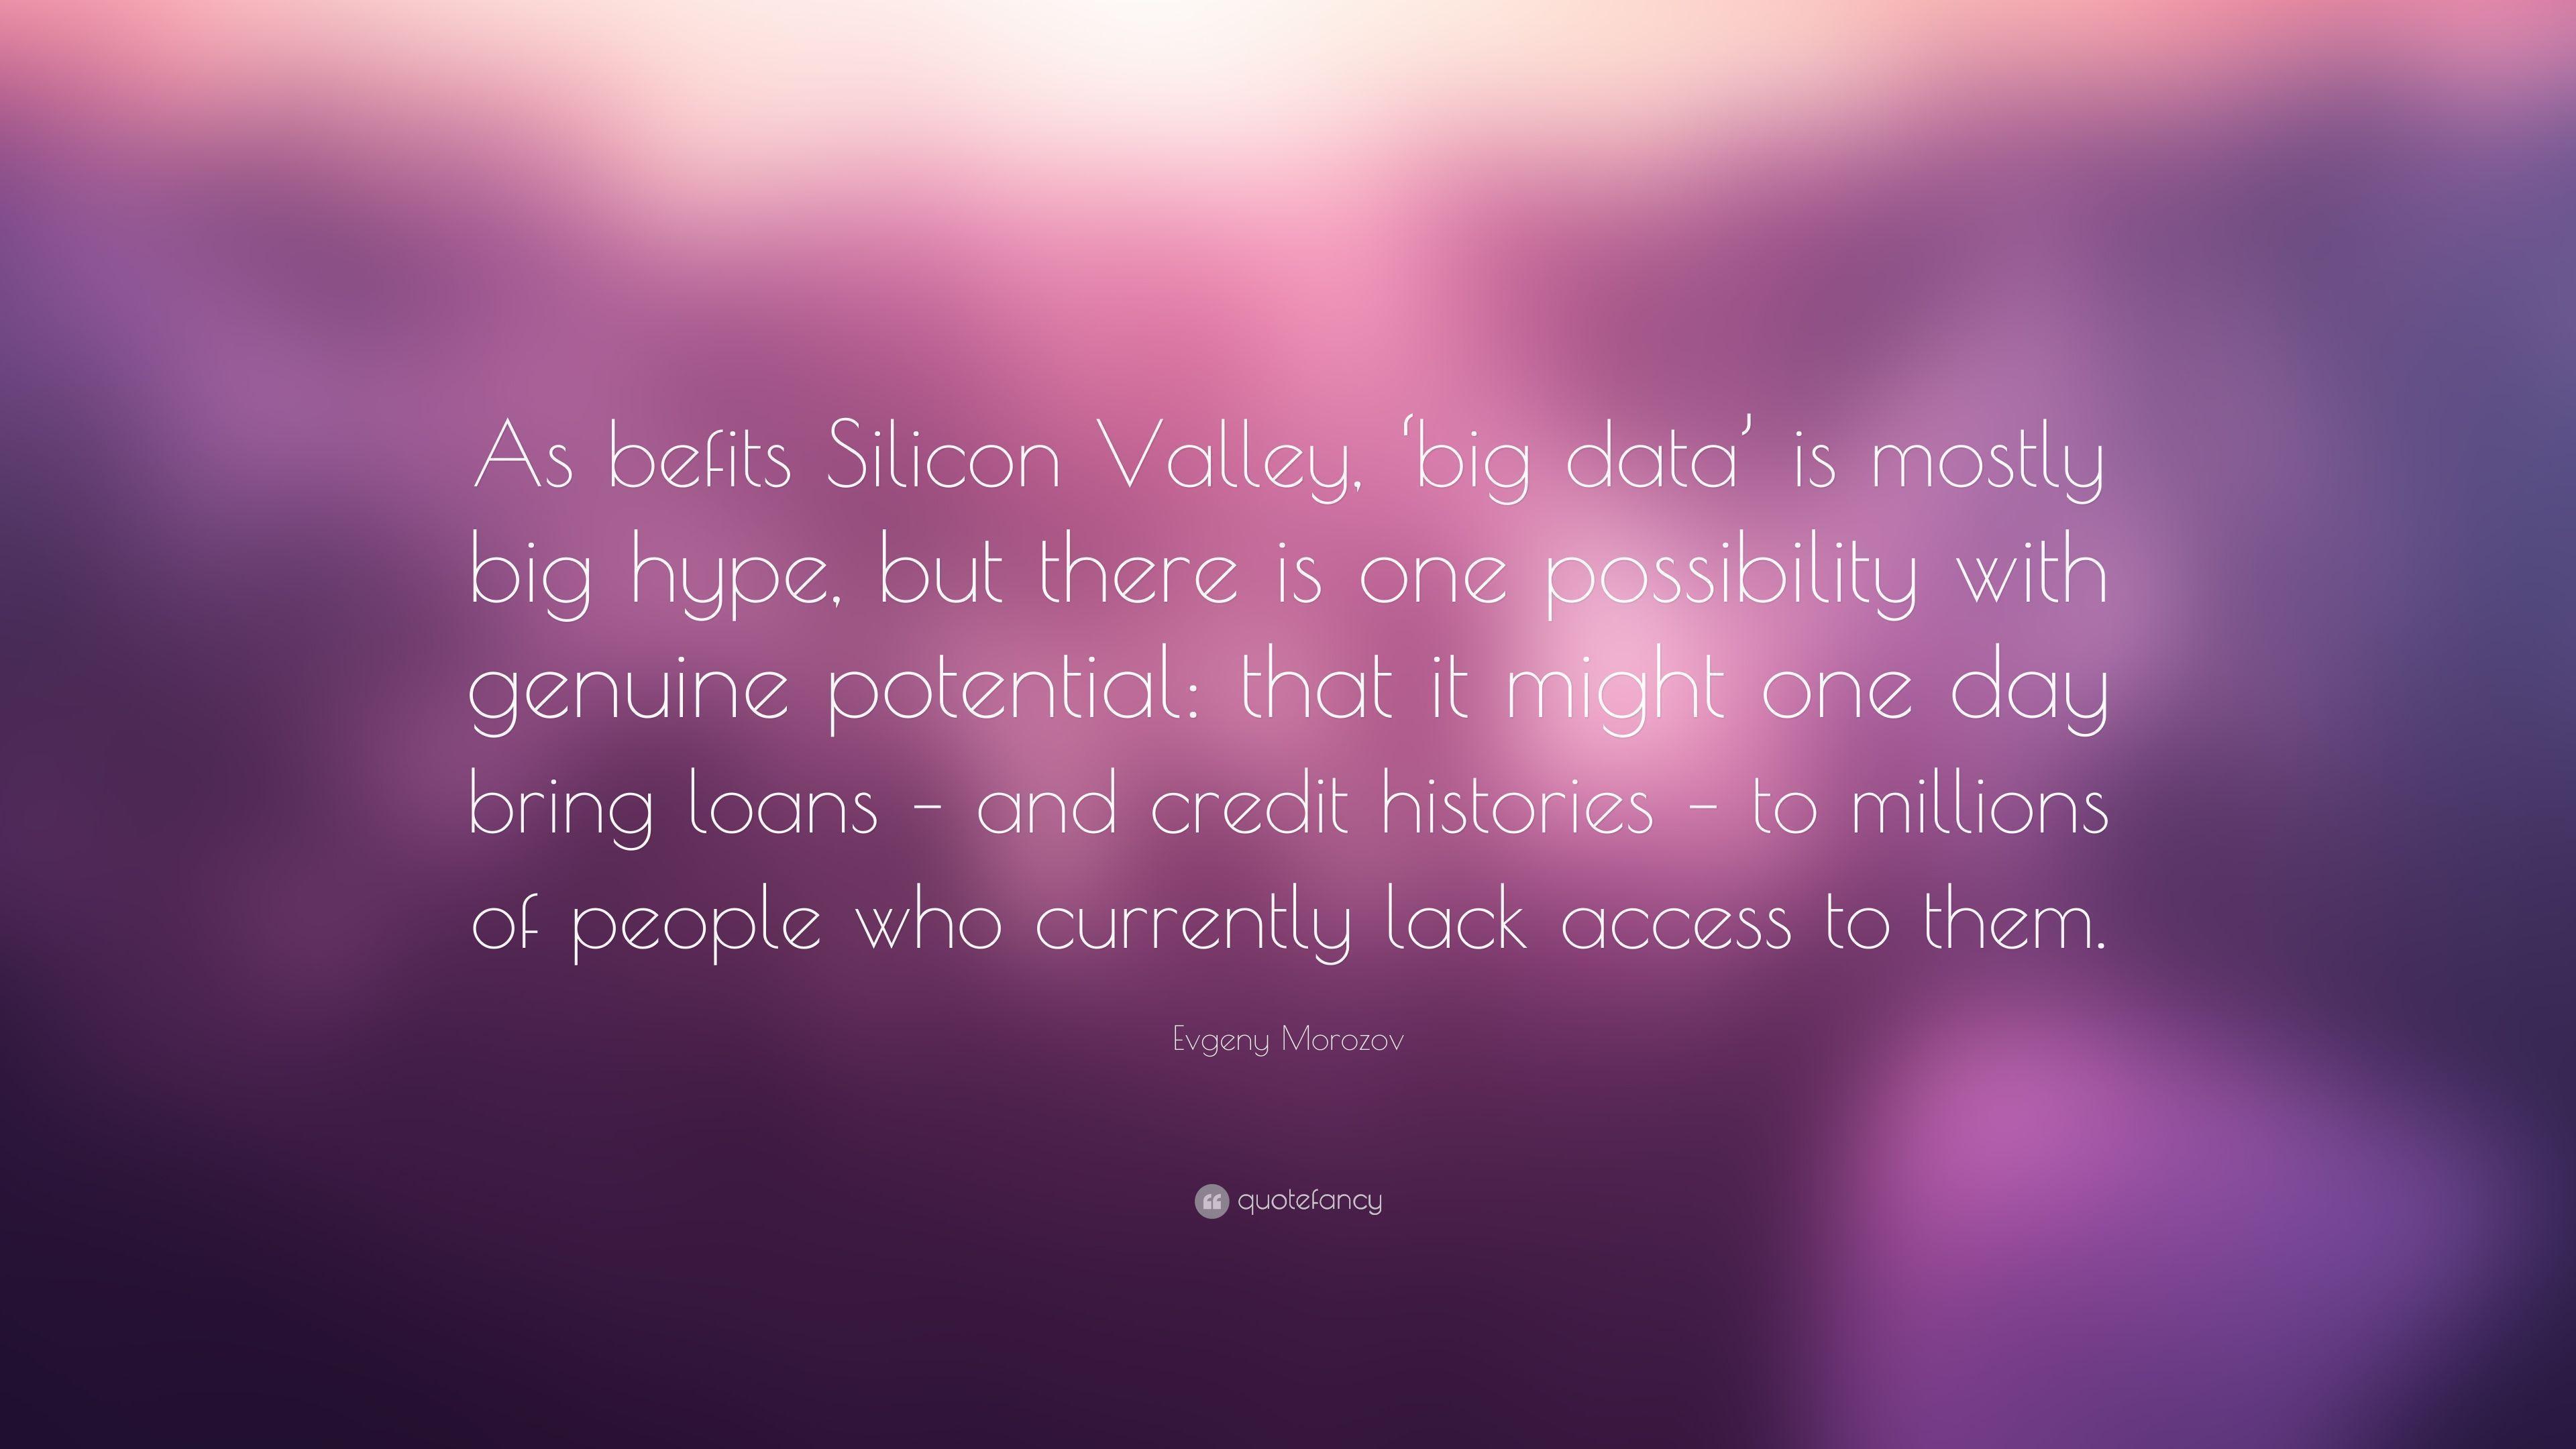 Evgeny Morozov Quote: “As befits Silicon Valley, 'big data' is